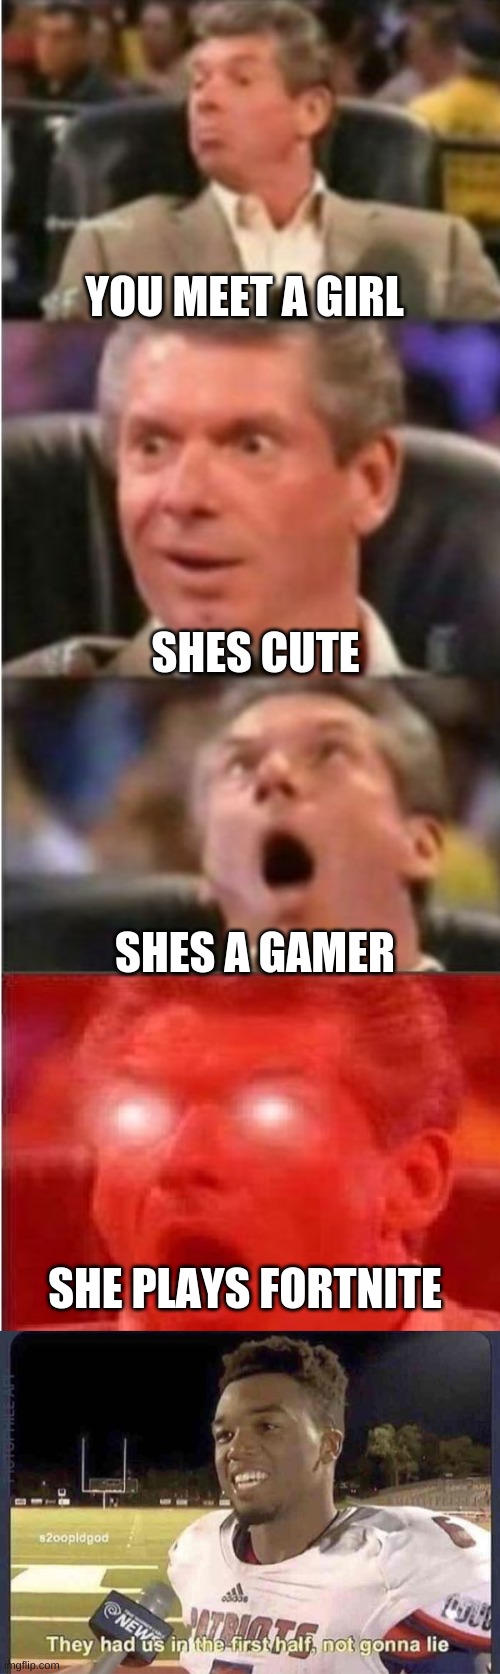 YOU MEET A GIRL; SHES CUTE; SHES A GAMER; SHE PLAYS FORTNITE | image tagged in mr mcmahon reaction,they had us in the first half not goona lie | made w/ Imgflip meme maker